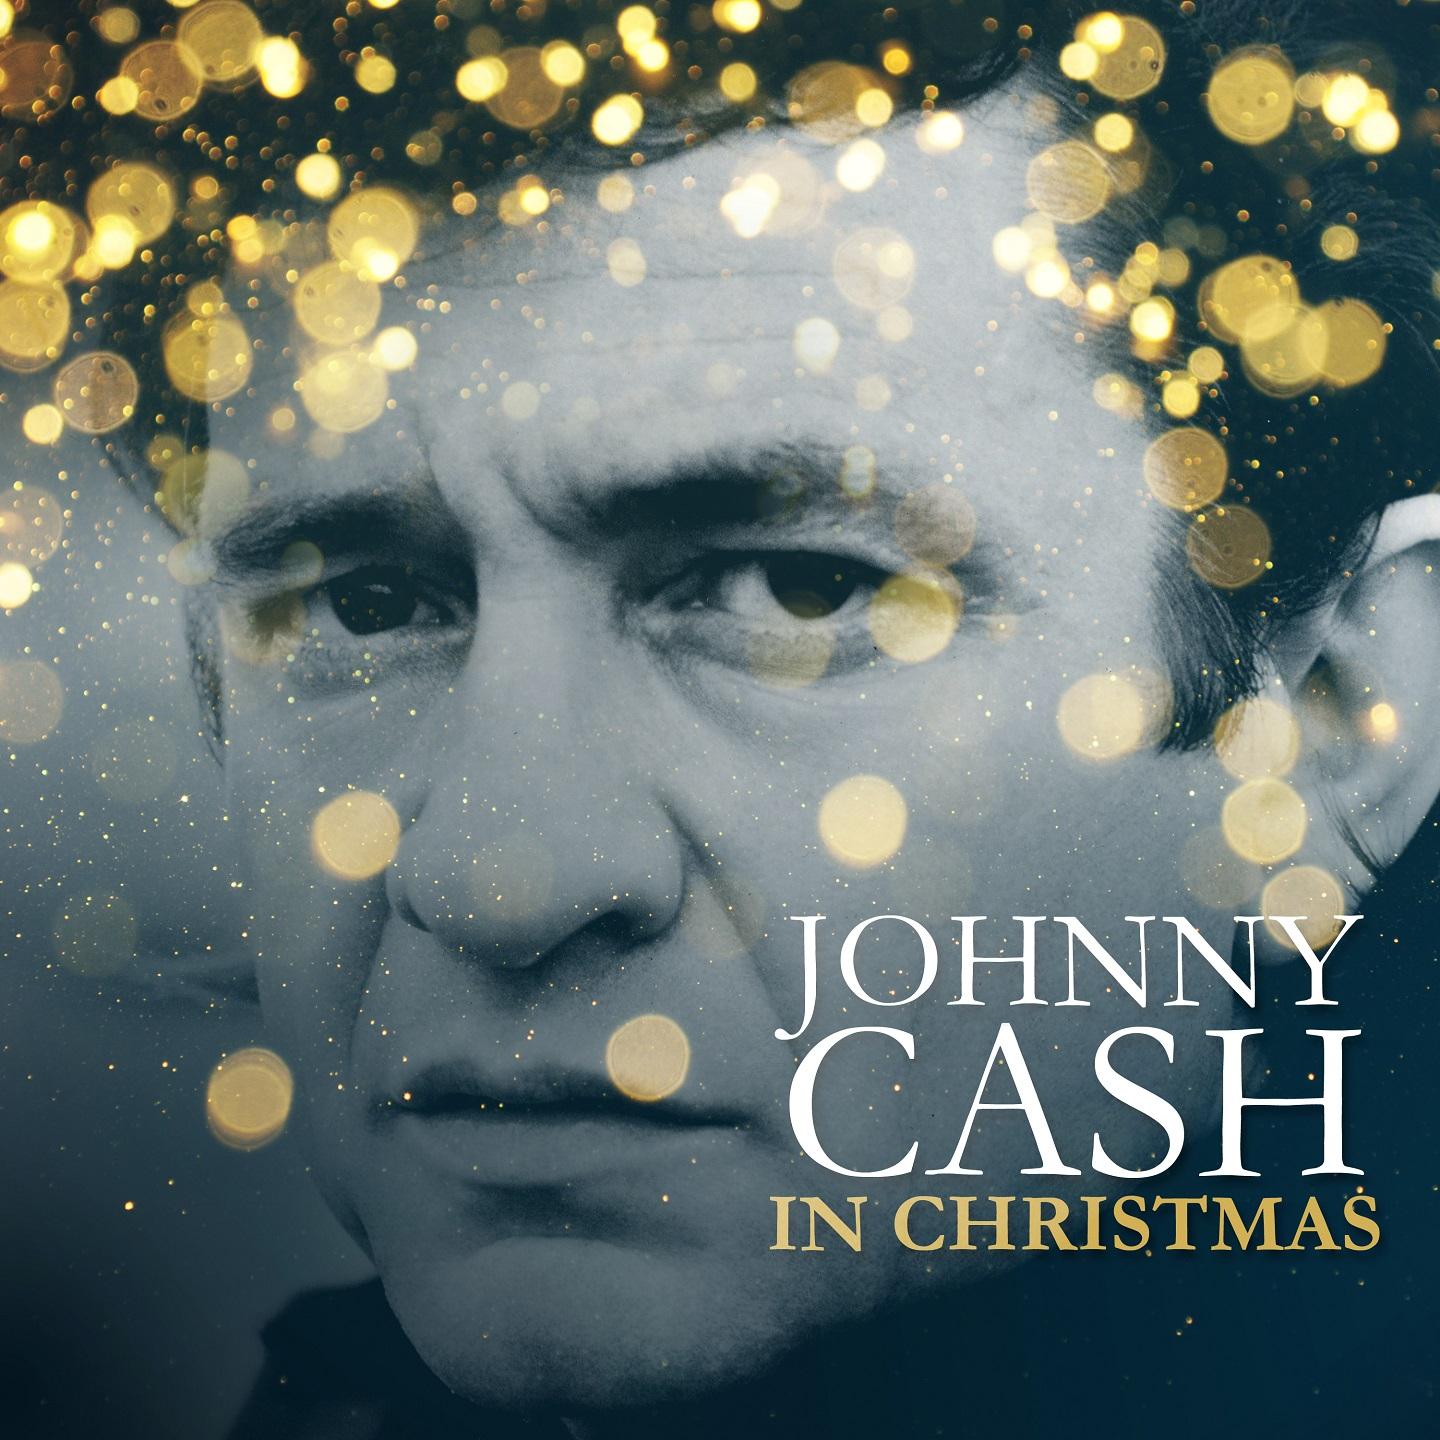 Johnny Cash in Christmas